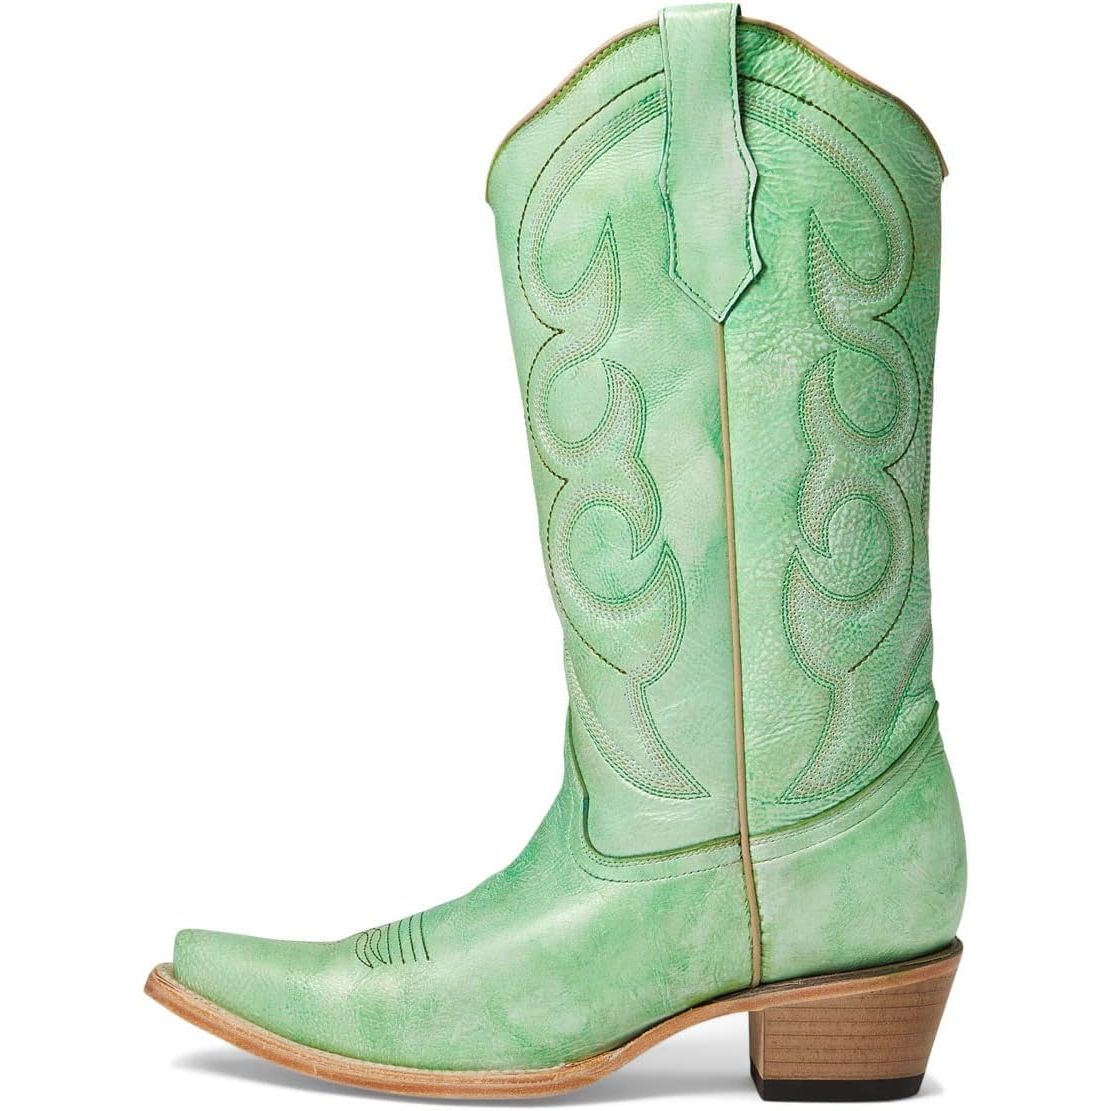 Circle G by Corral Ladies Hand Painted Lime Green Snip Toe Boots L5969